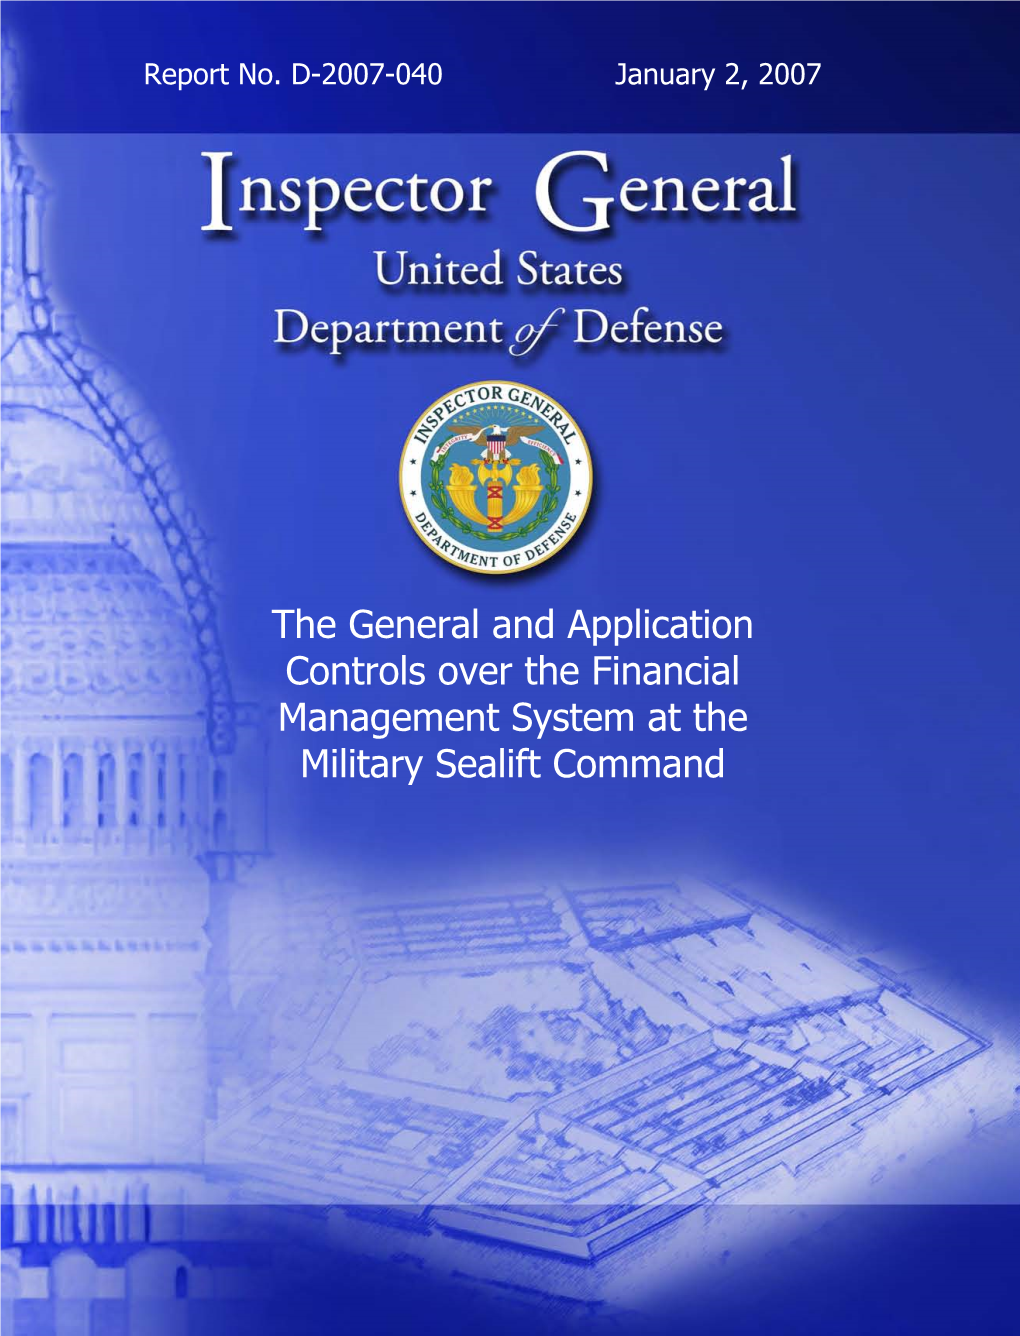 The General and Application Controls Over the Financial Management System at the Military Sealift Command (Report No